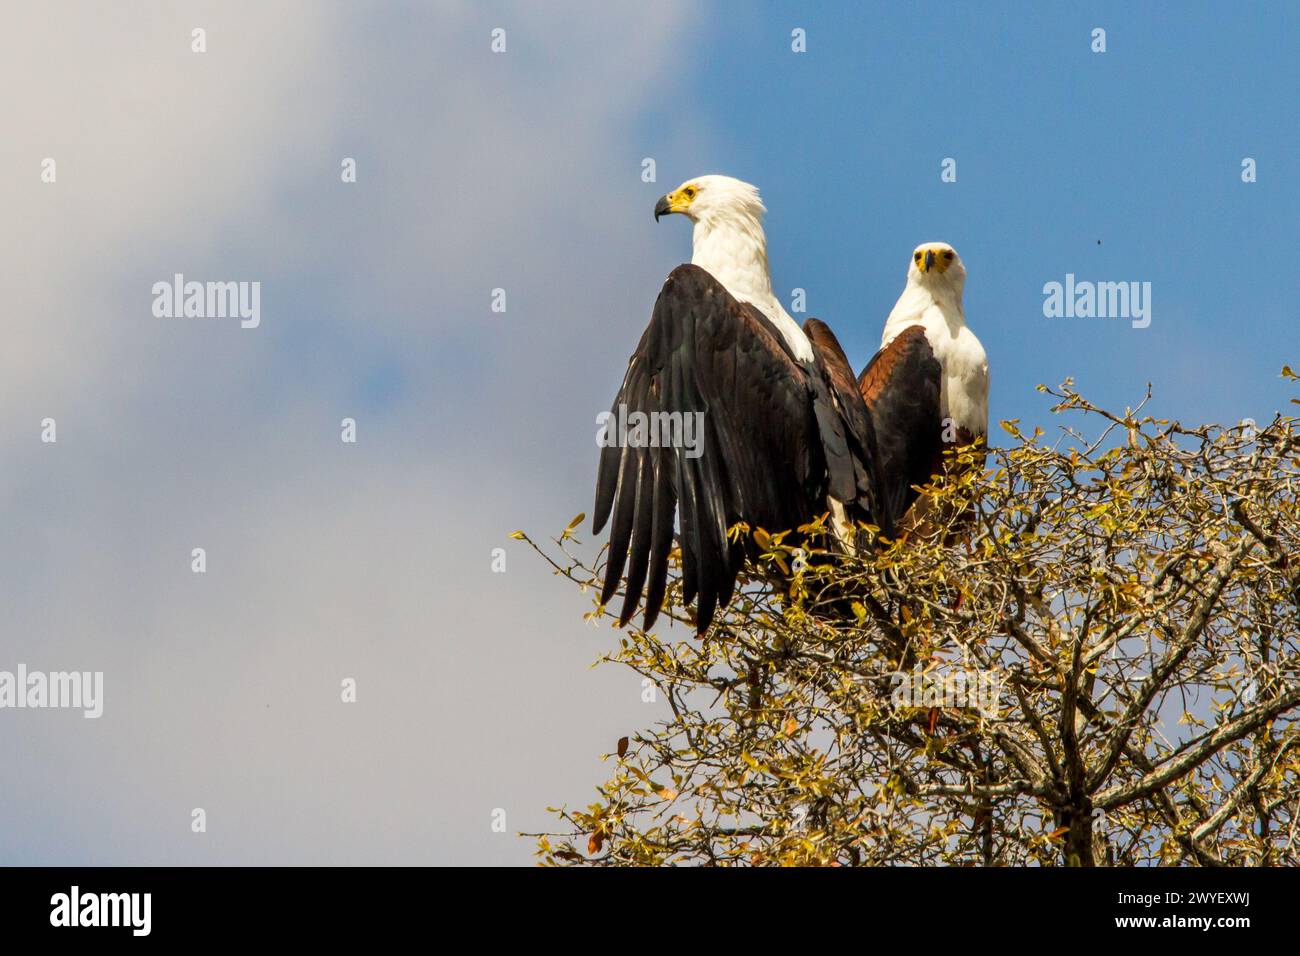 Two African Fish Eagles sitting on a tree top, one with its wings spread, against a bright blue sky, in the Kruger National Park of South Africa. Stock Photo